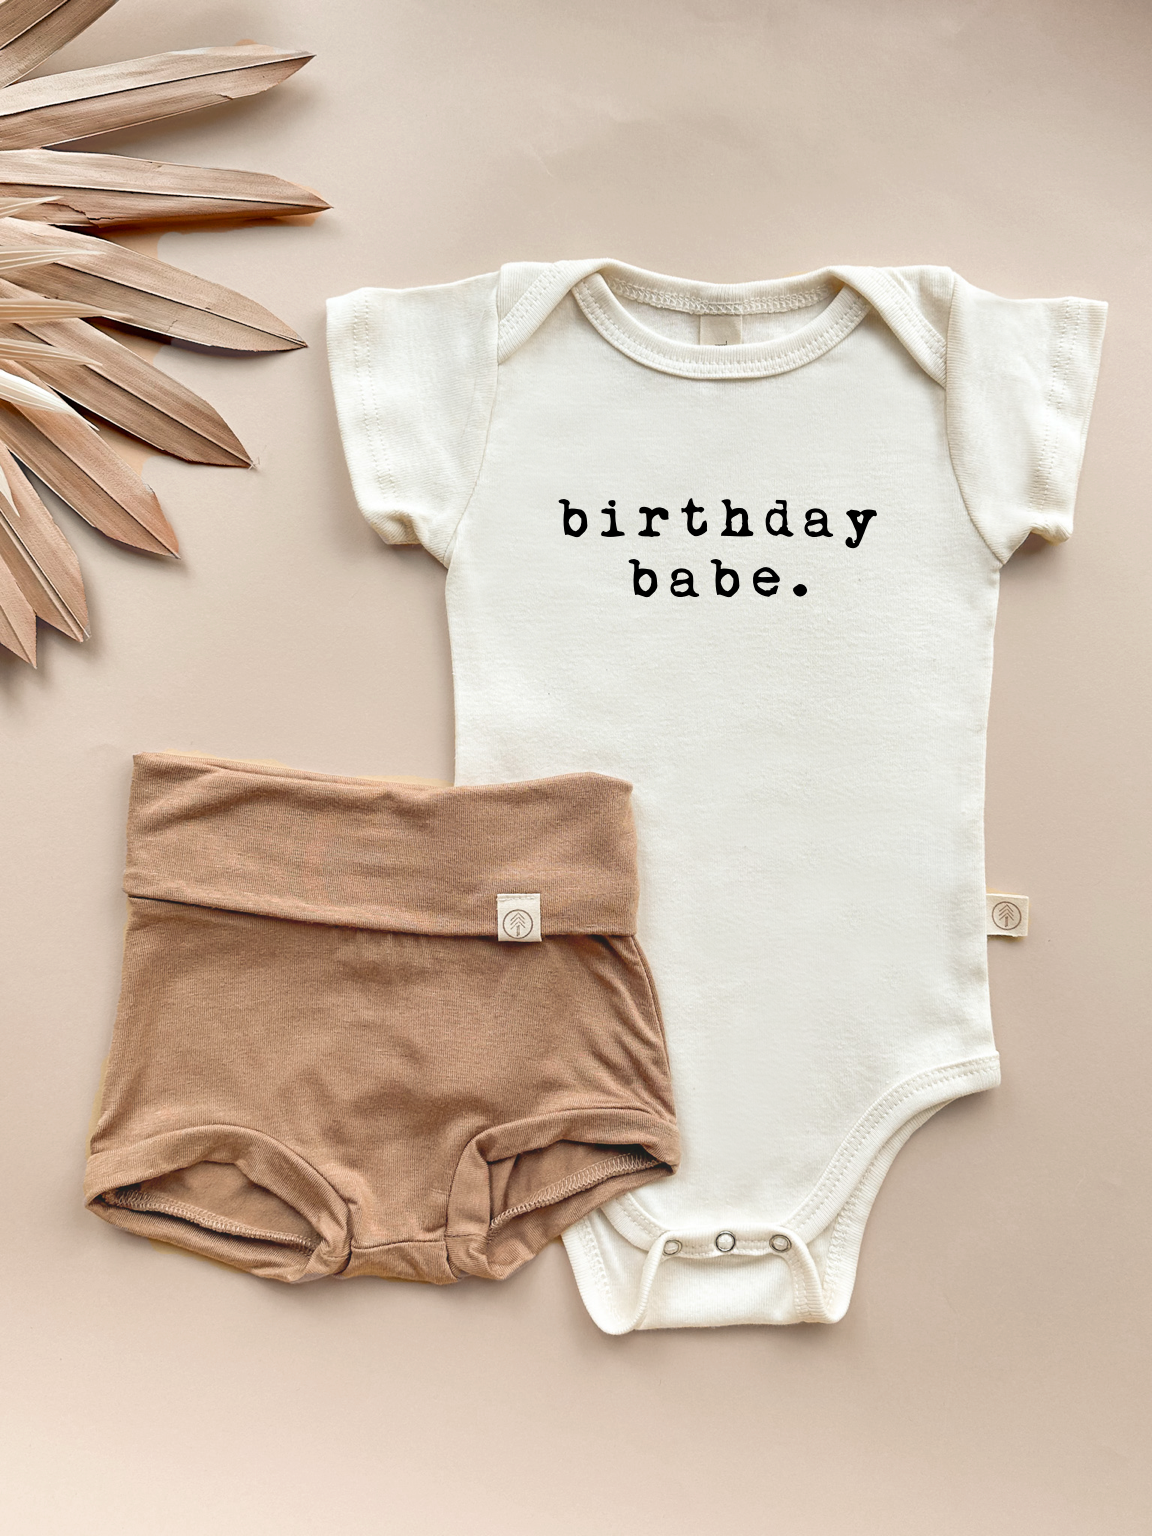 Birthday Babe -  Bundle Clay Bloomers Outfit Set